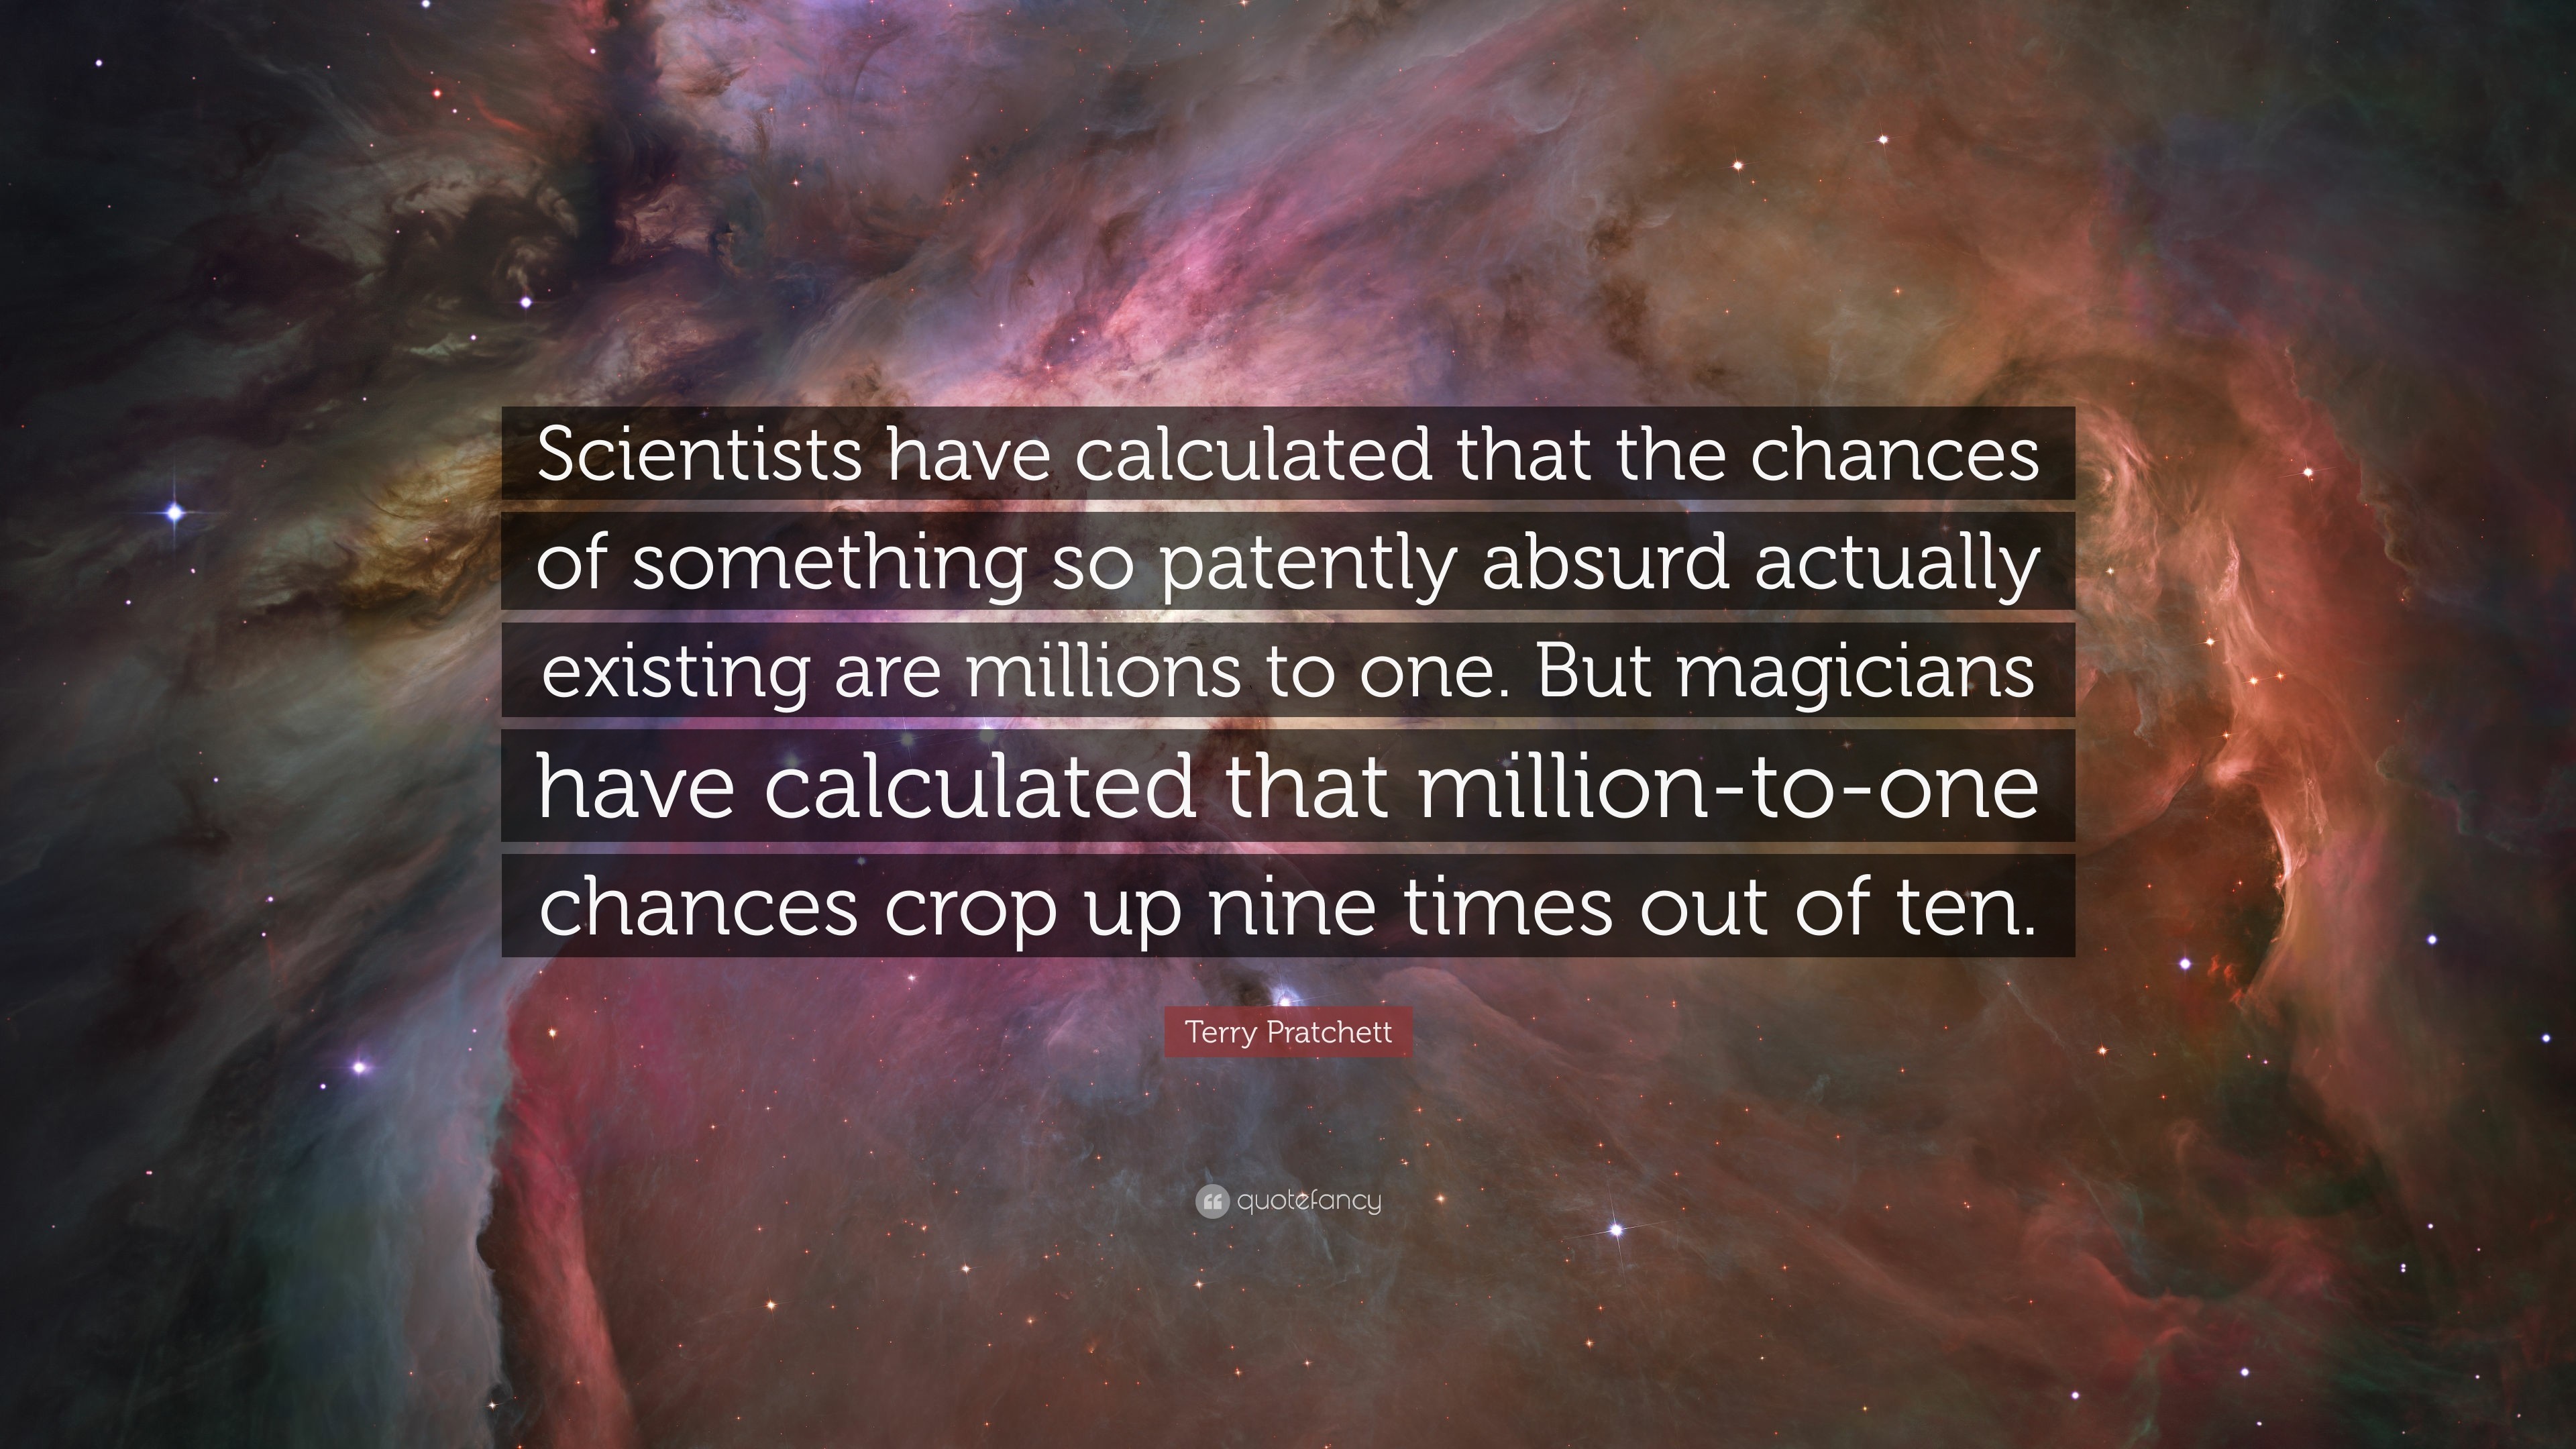 3840x2160 Science Quotes: “Scientists have calculated that the chances of something  so patently absurd actually